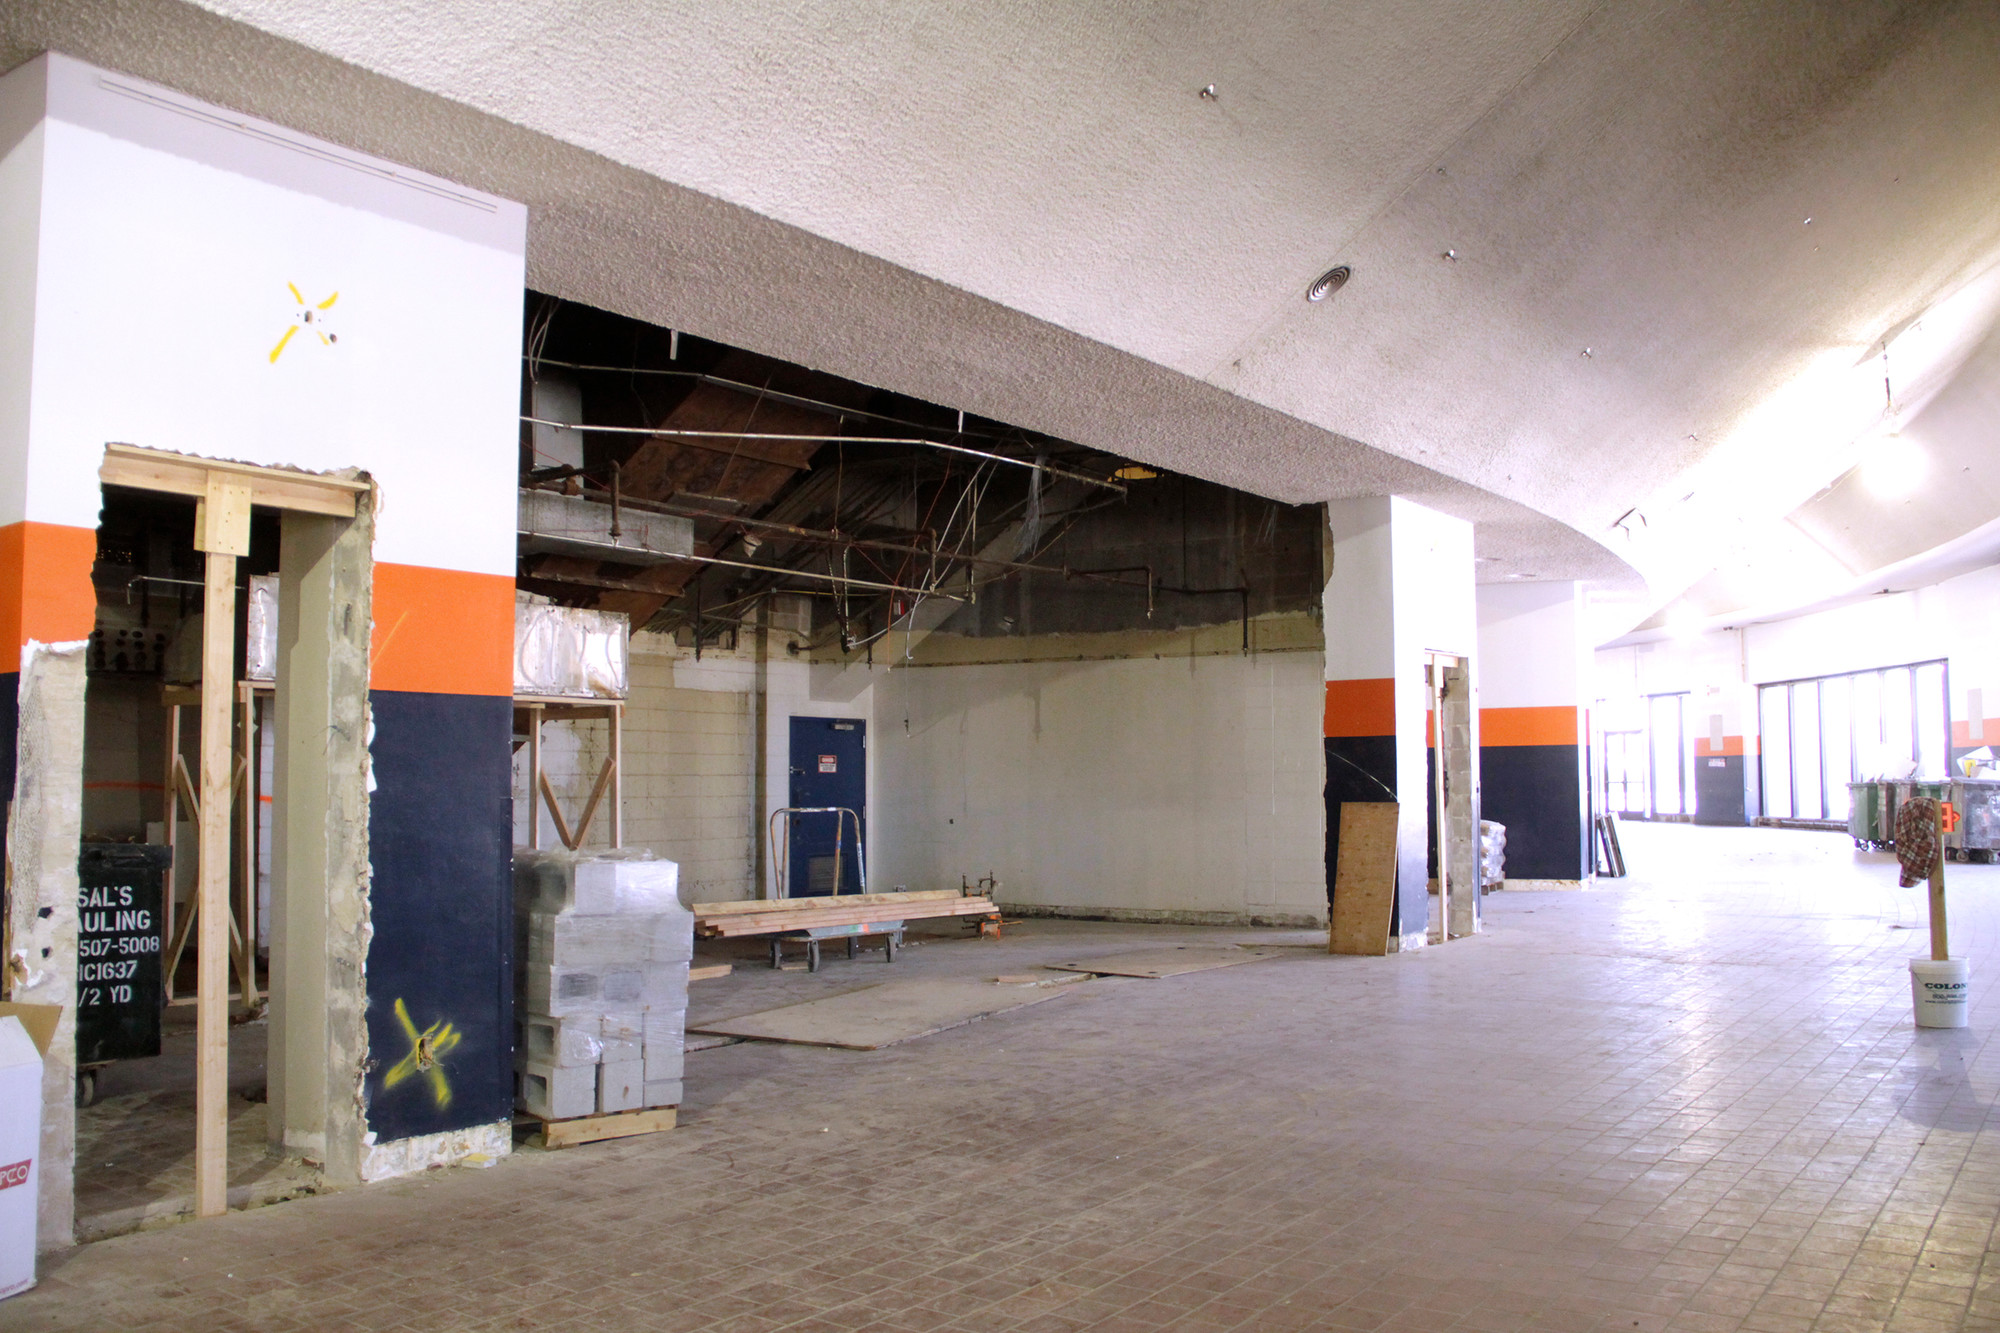 The concourse — where windows into the bowl will be installed — is currently being demolished.